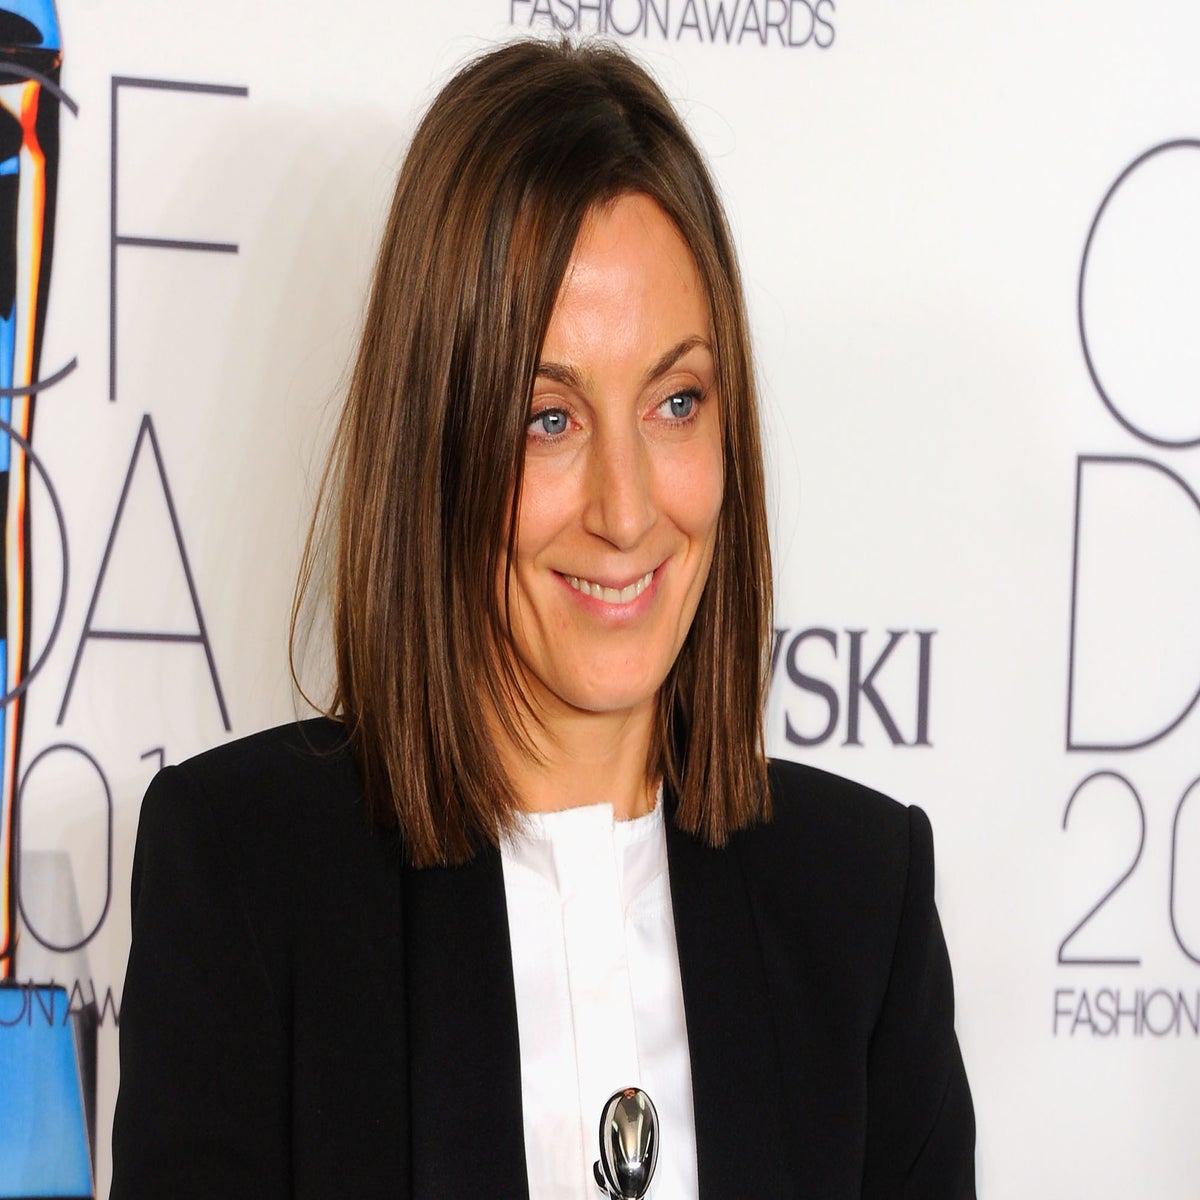 Fashion industry and fans prepare for Phoebe Philo own-brand launch, Phoebe  Philo